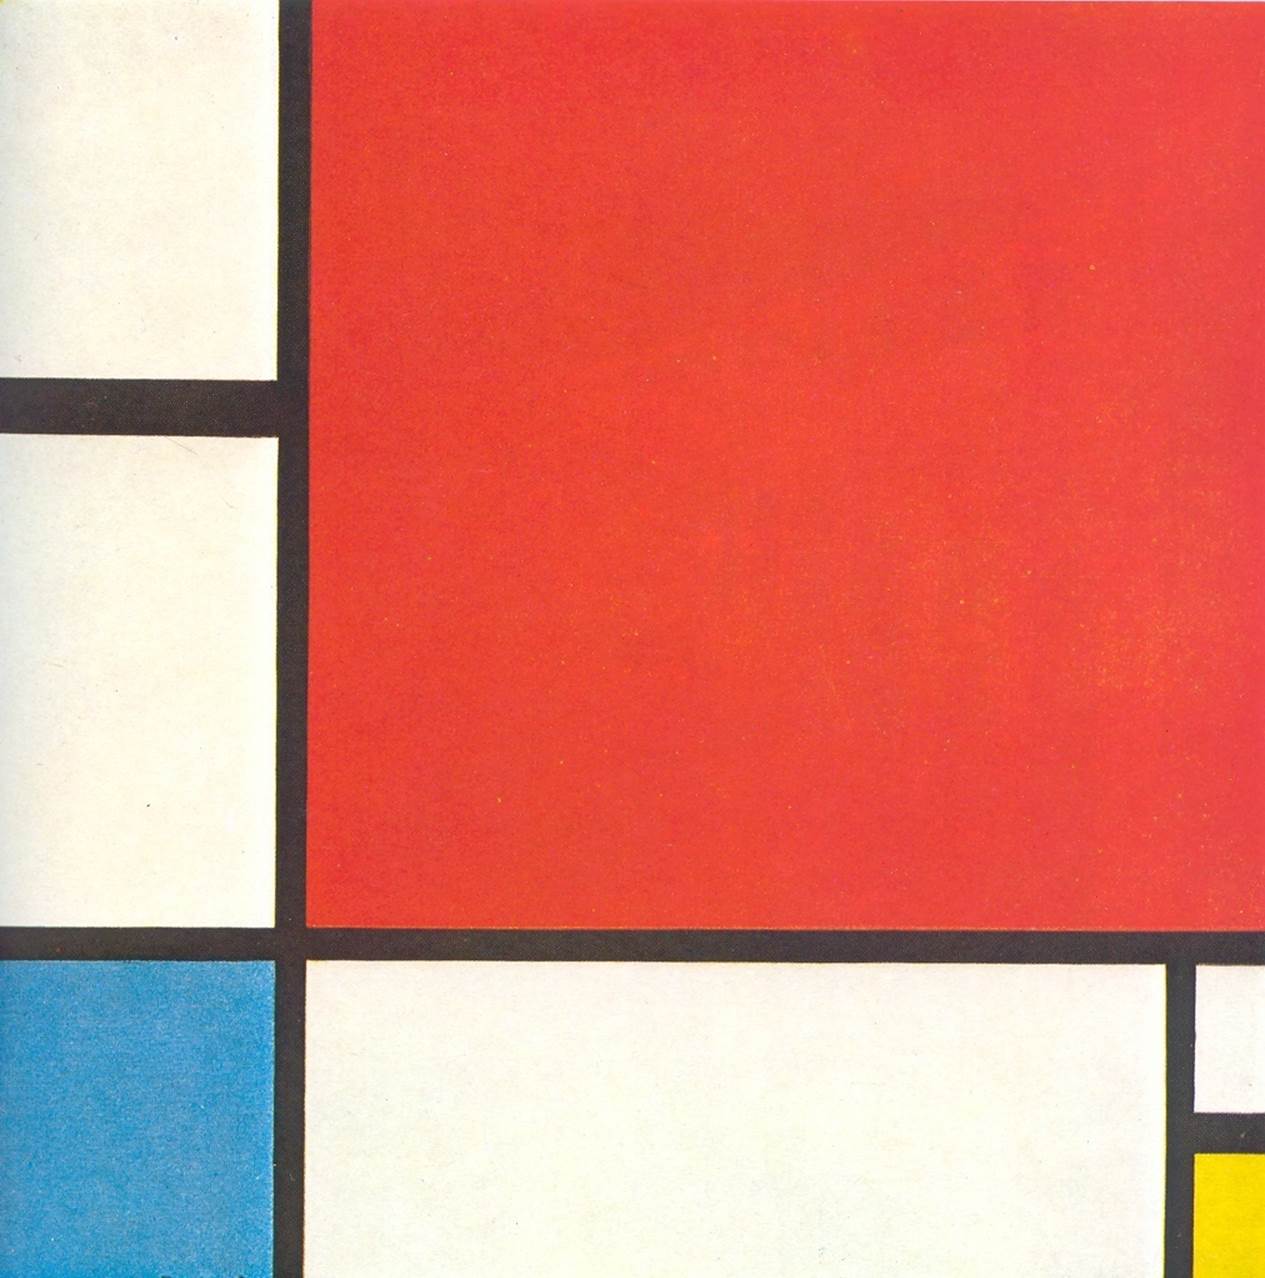 Composition with Red, Blue and Yellow--Piet Mondrian (1930)